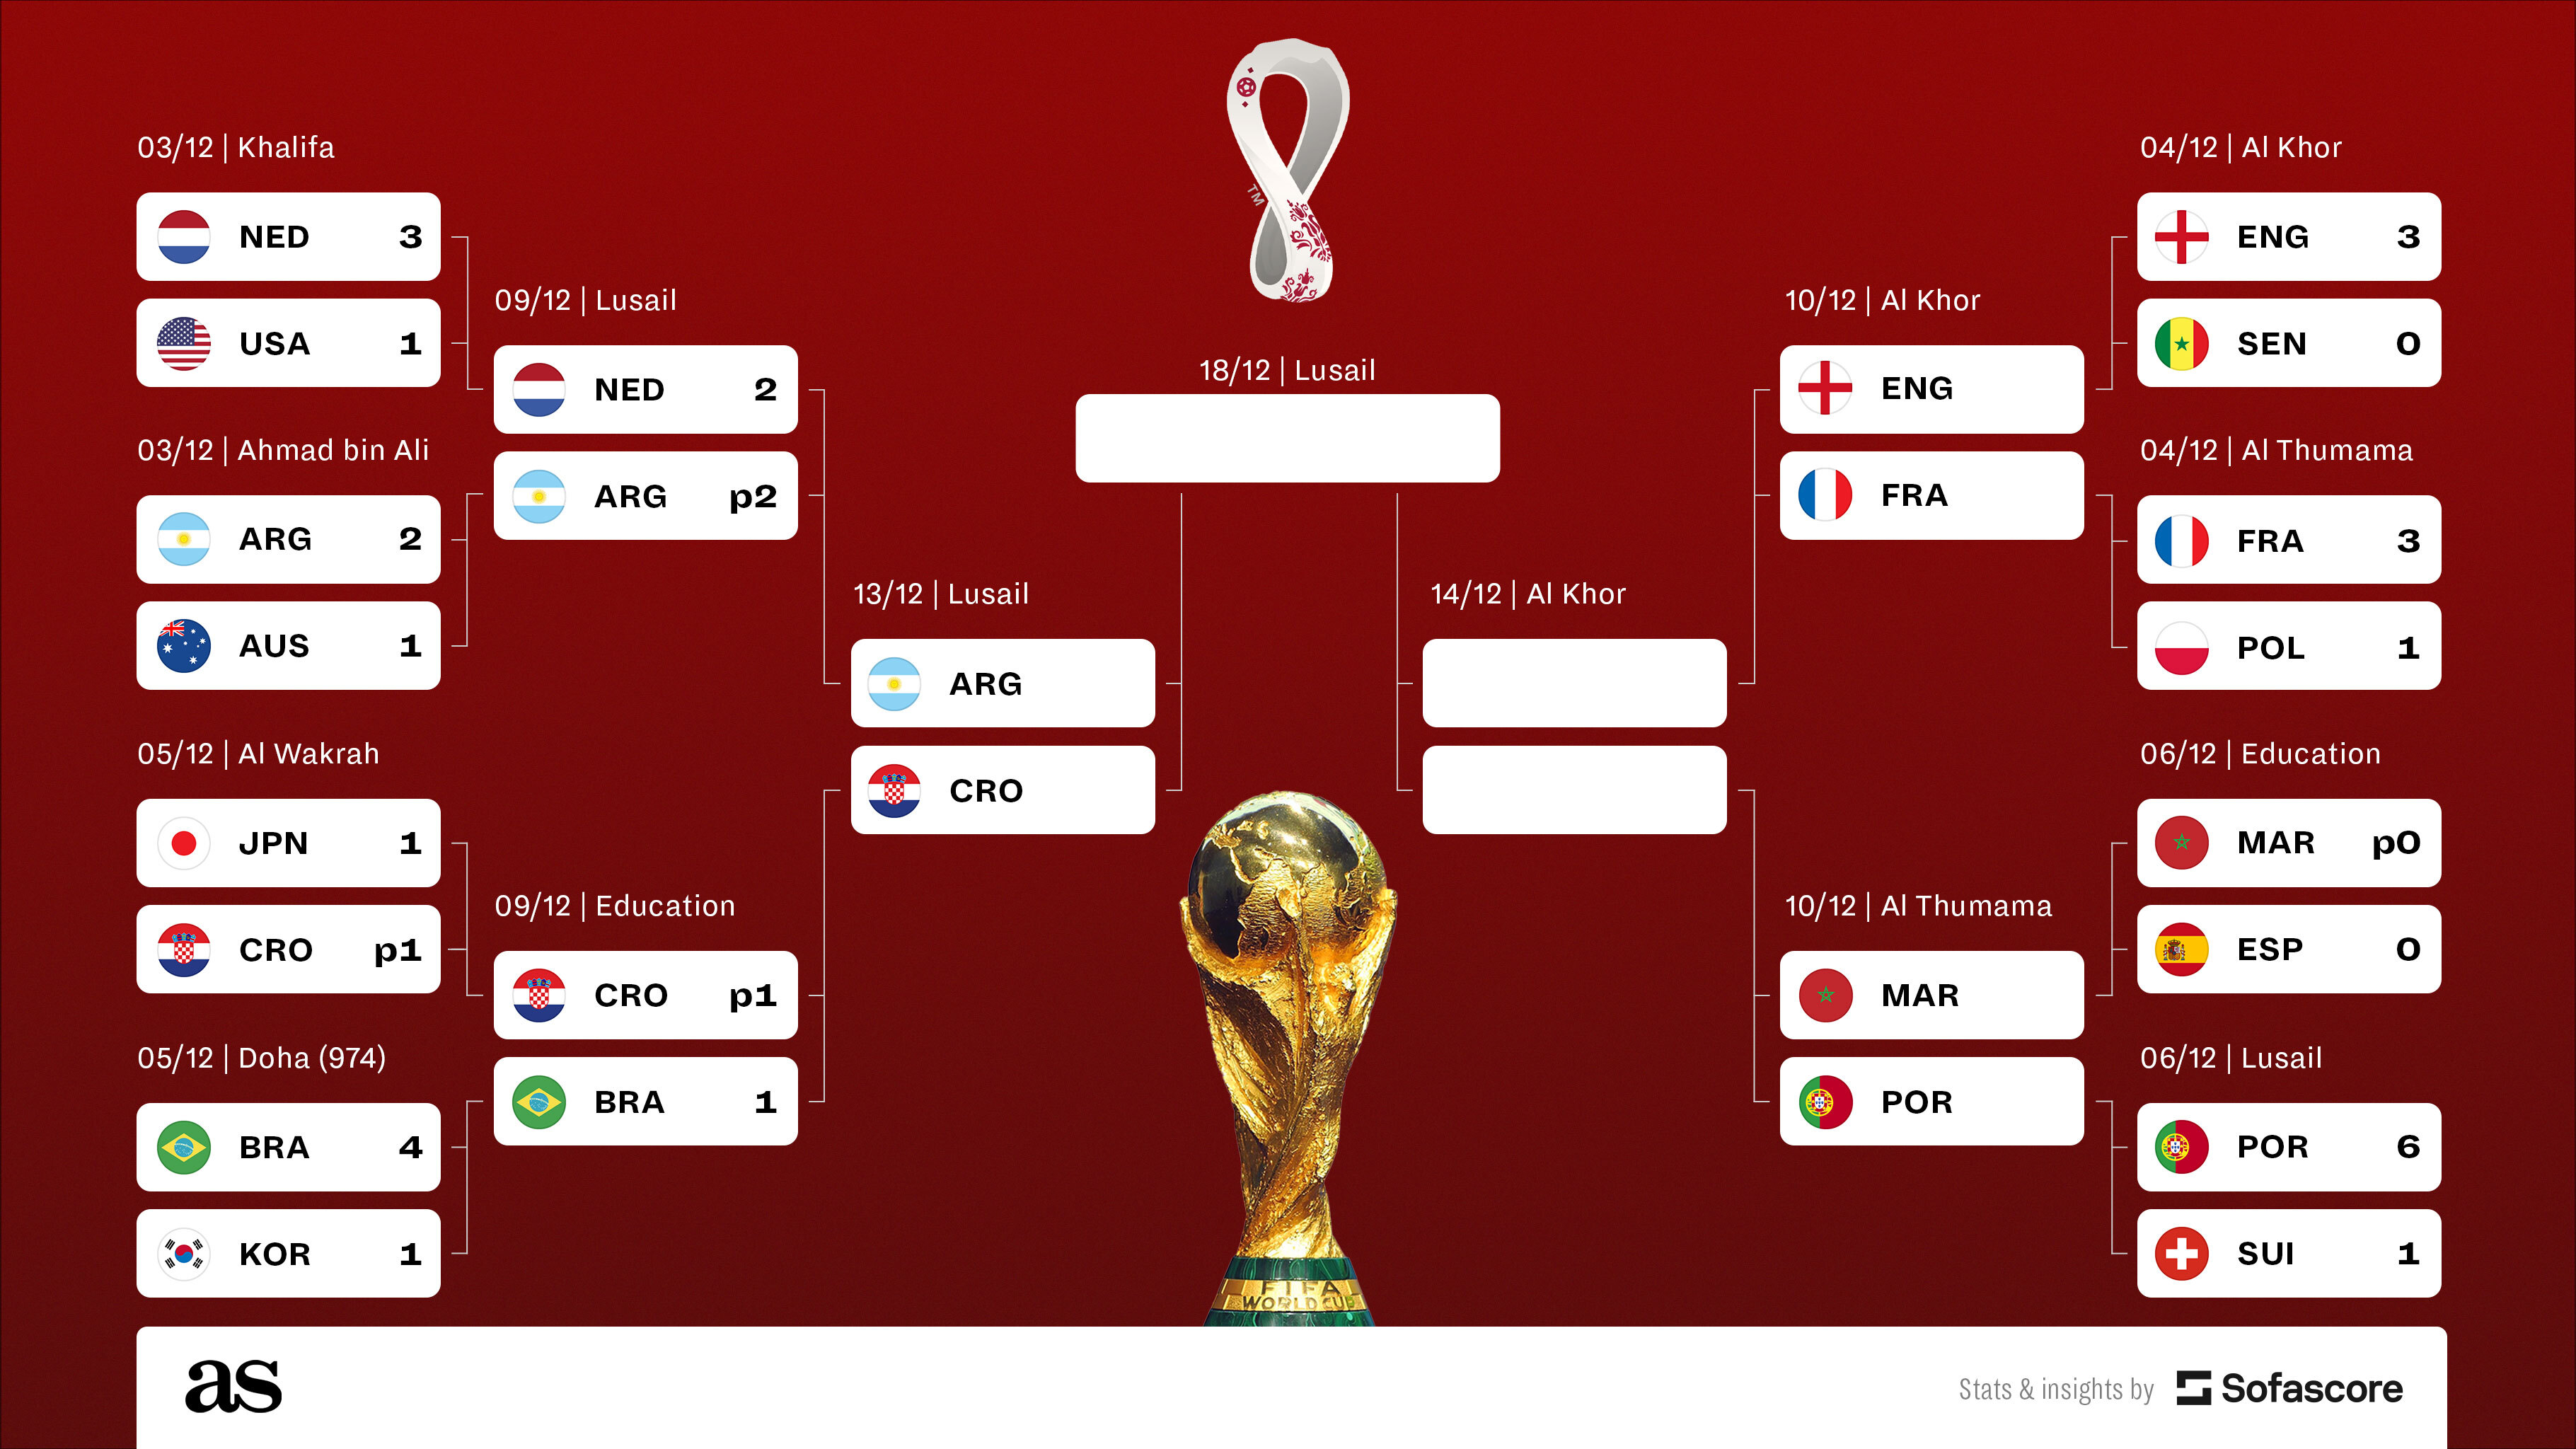 Qatar 2022 World Cup daily schedule who plays today, 10 December?